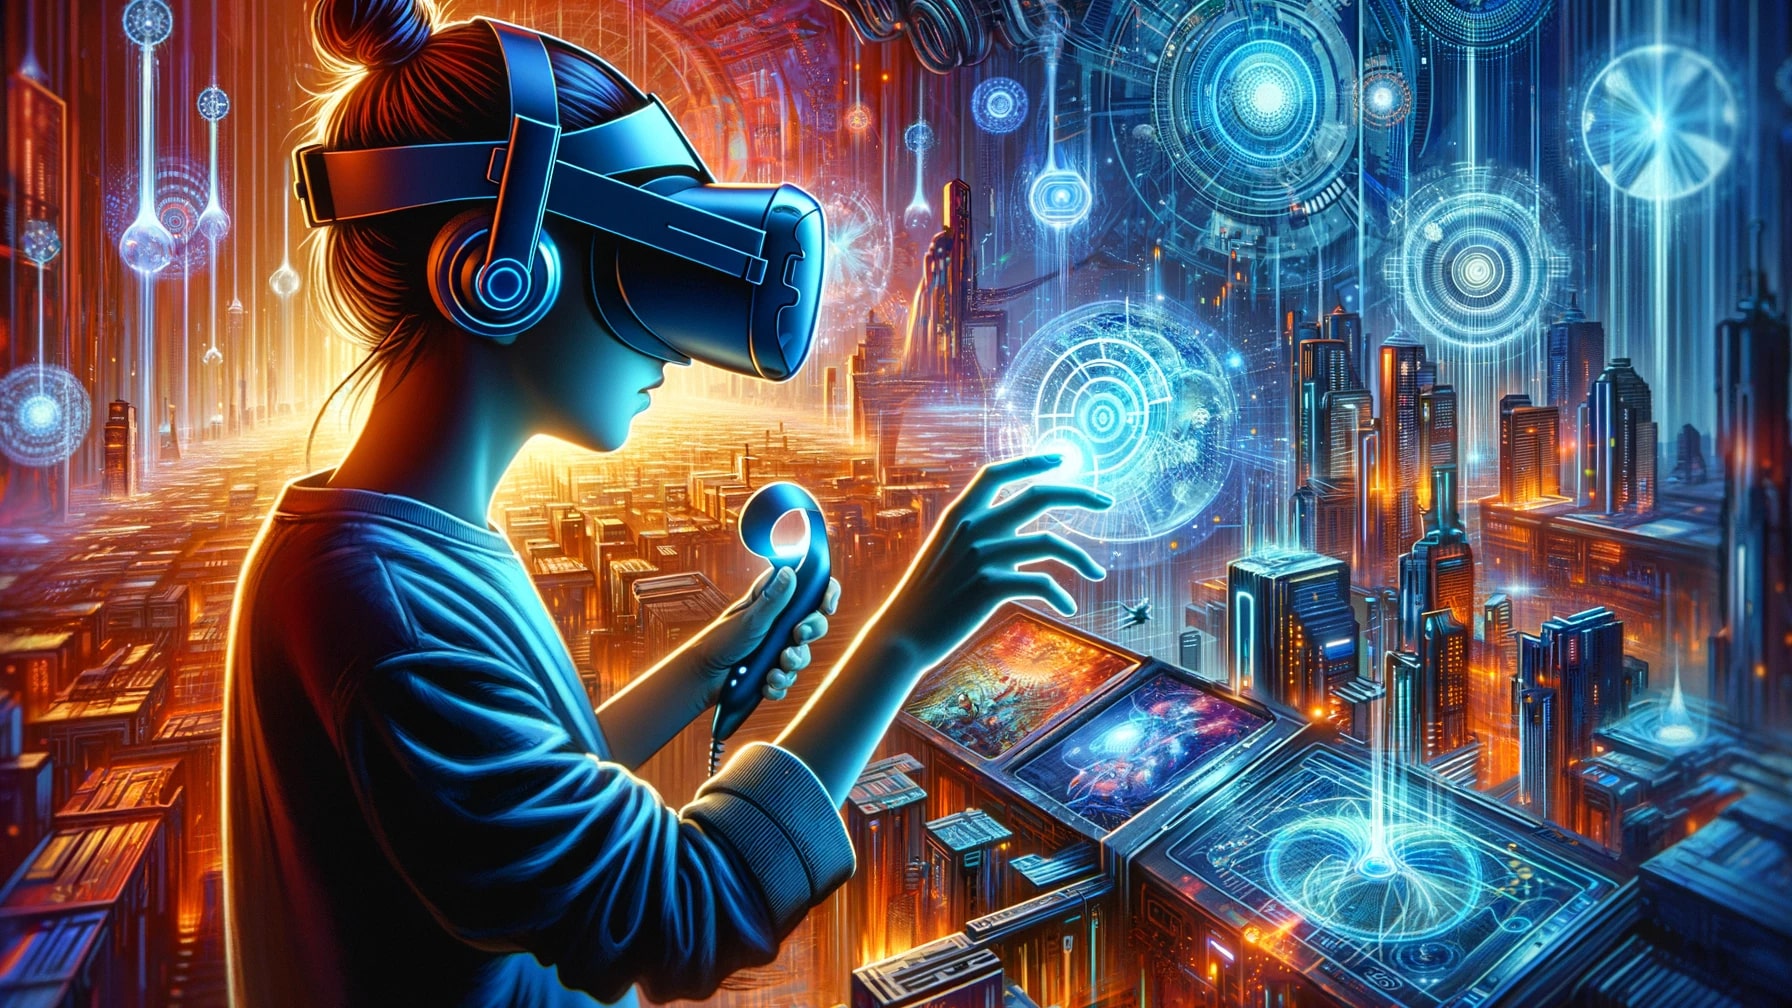 Virtual Reality (VR) and Augmented Reality